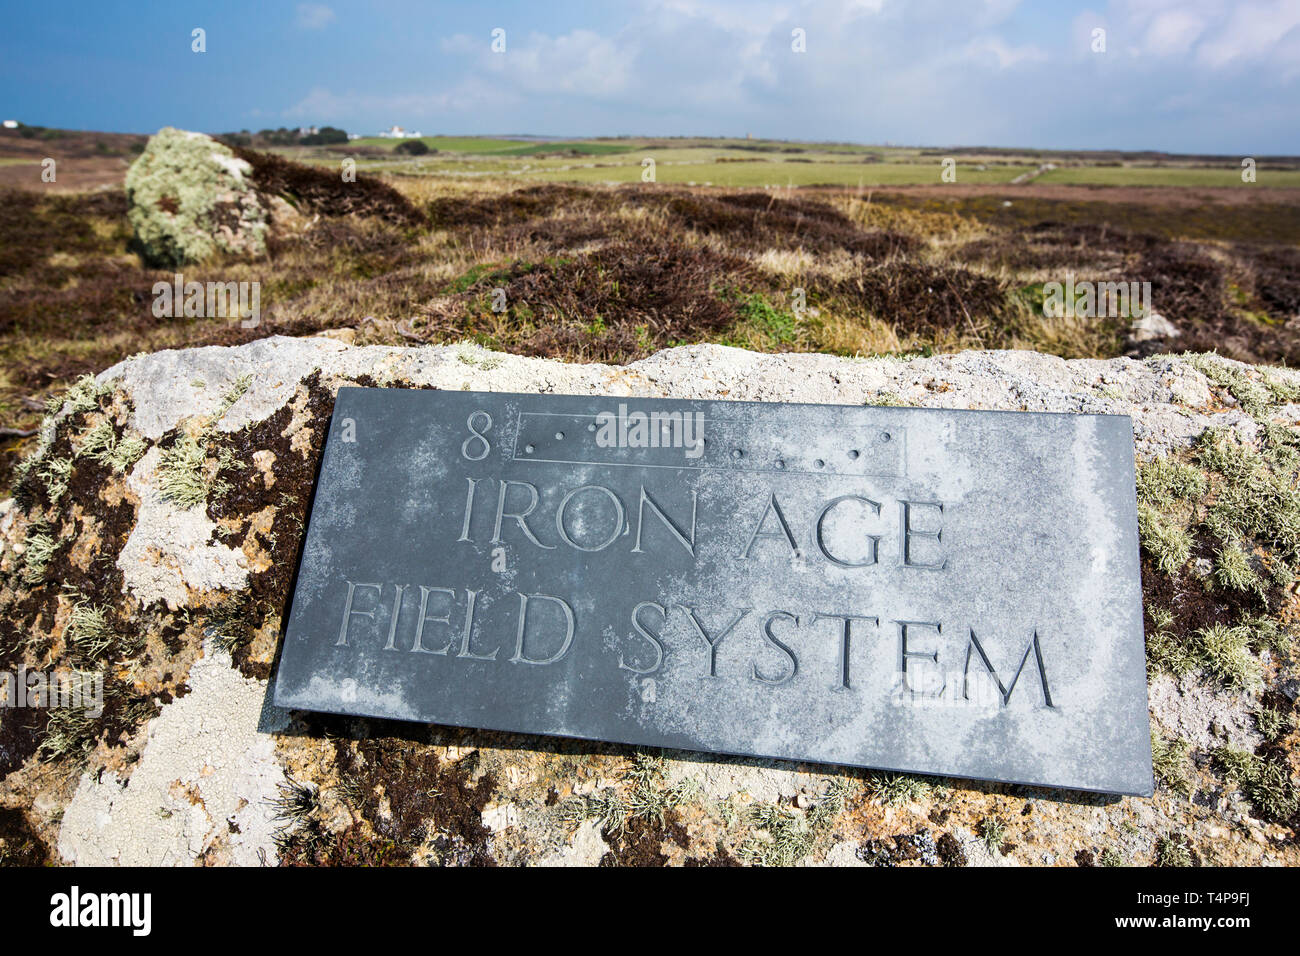 An iron age field system at Lands End, Cornwall, UK. Stock Photo